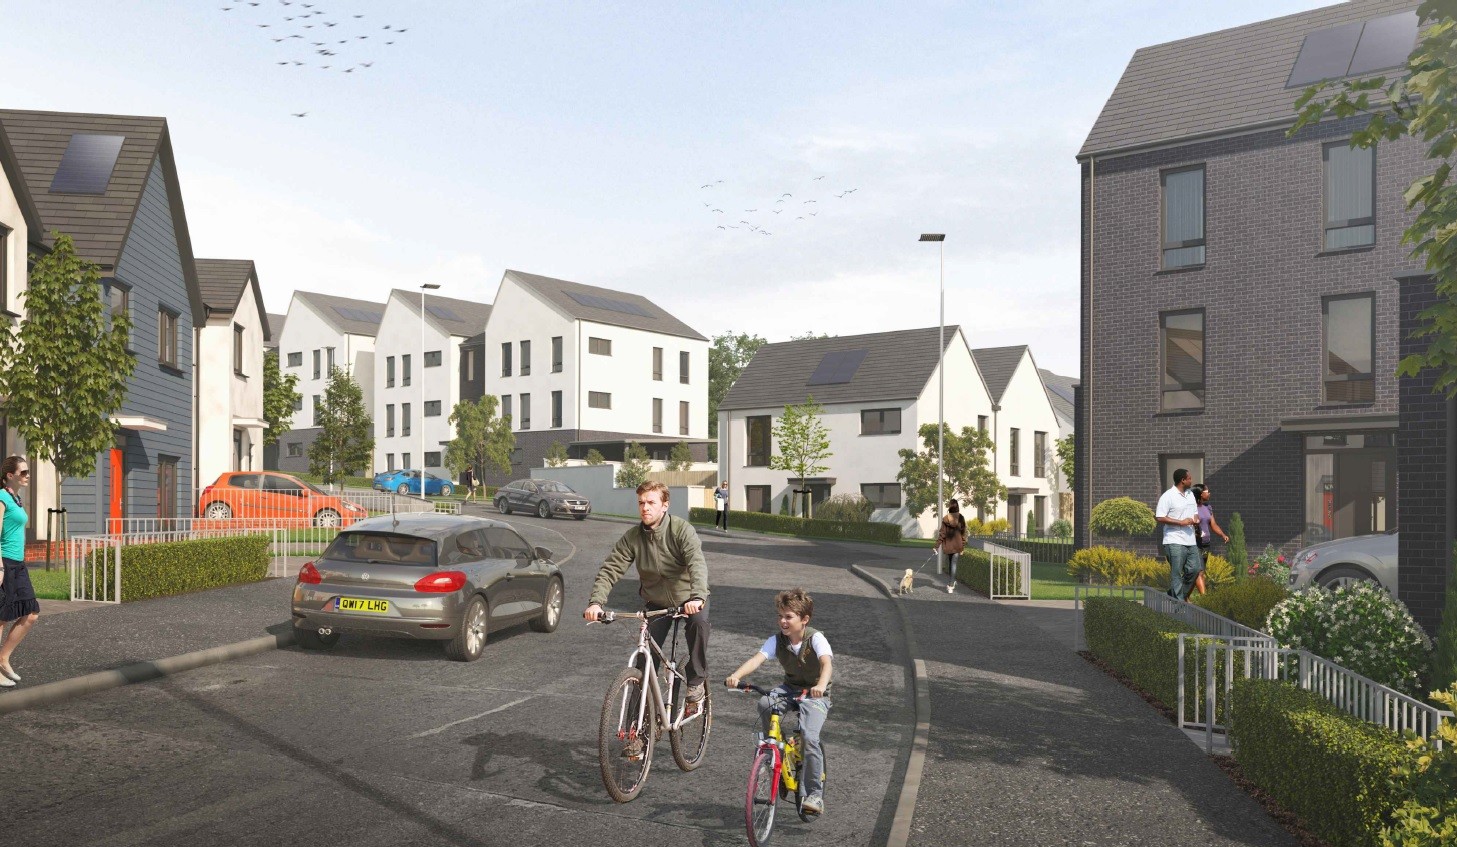 Home Group submits plans to complete Dundee regeneration project